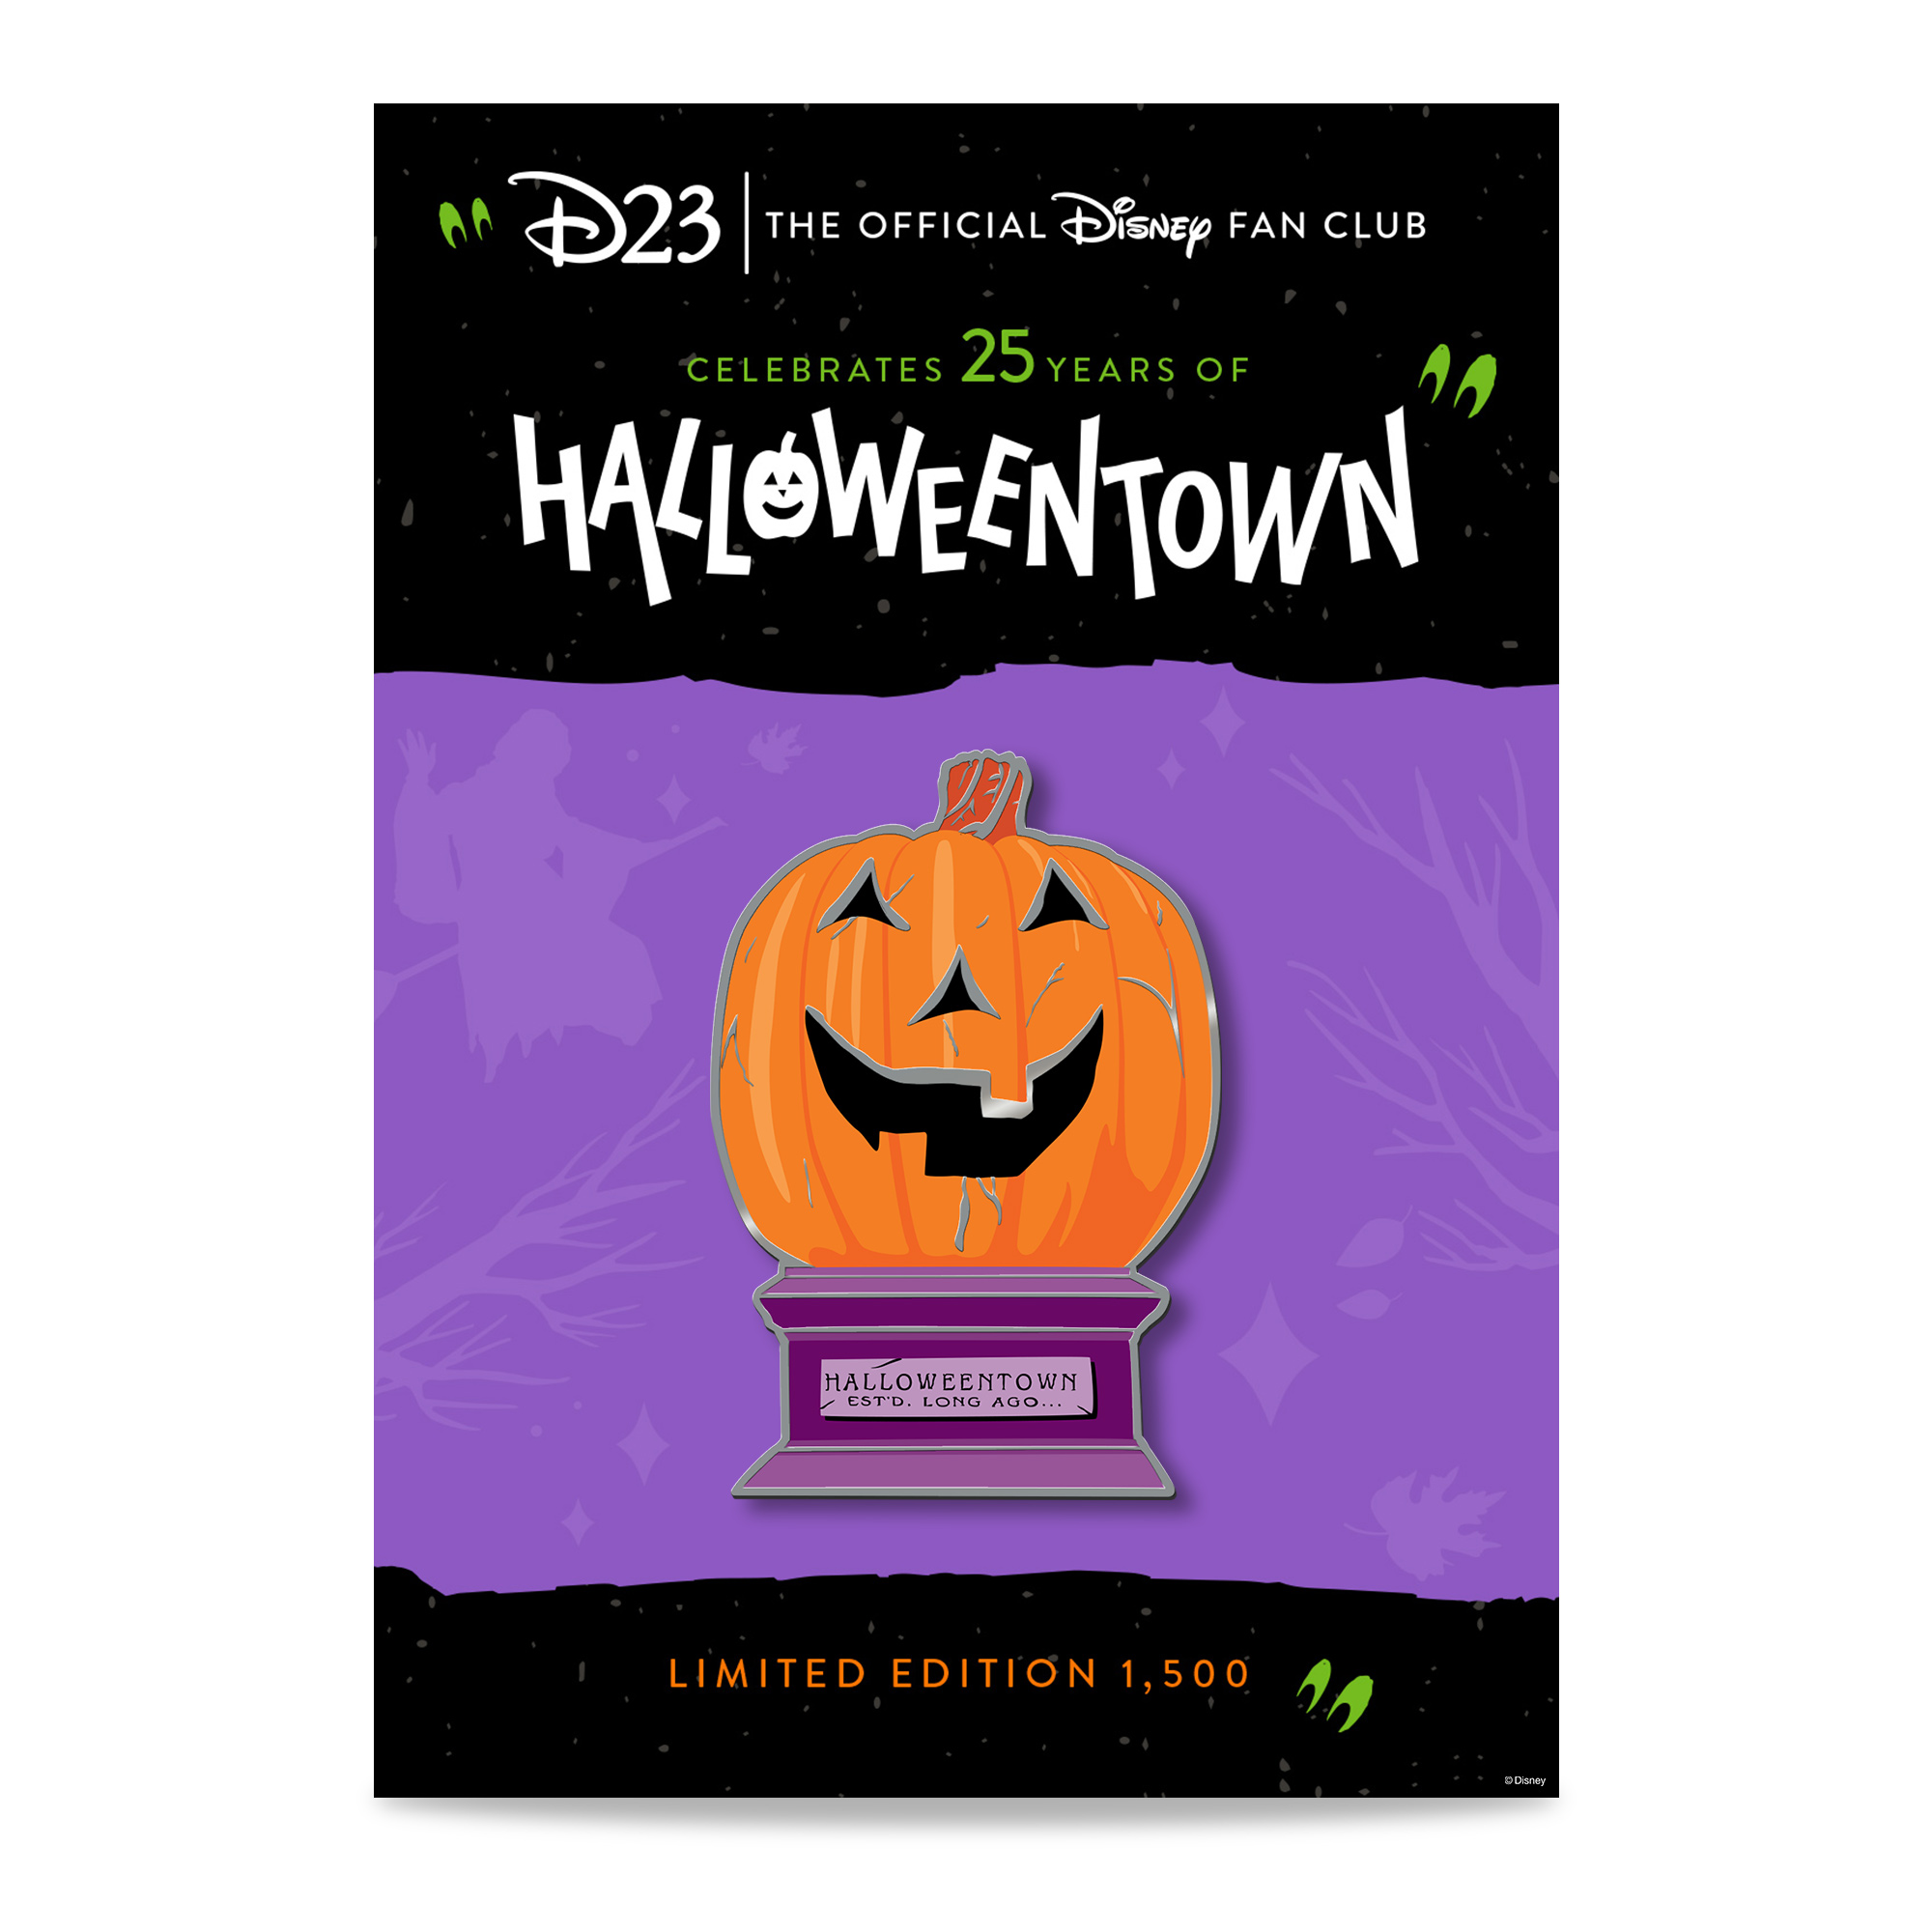 Artwork featuring D23-exclusive Halloweentown 25th Anniversary Pin. Artwork of pin is purple and orange with silver elements, inspired by the iconic town-square Jack O’ Lantern. The pin is featured on a backer card with purple and black Halloween designs.